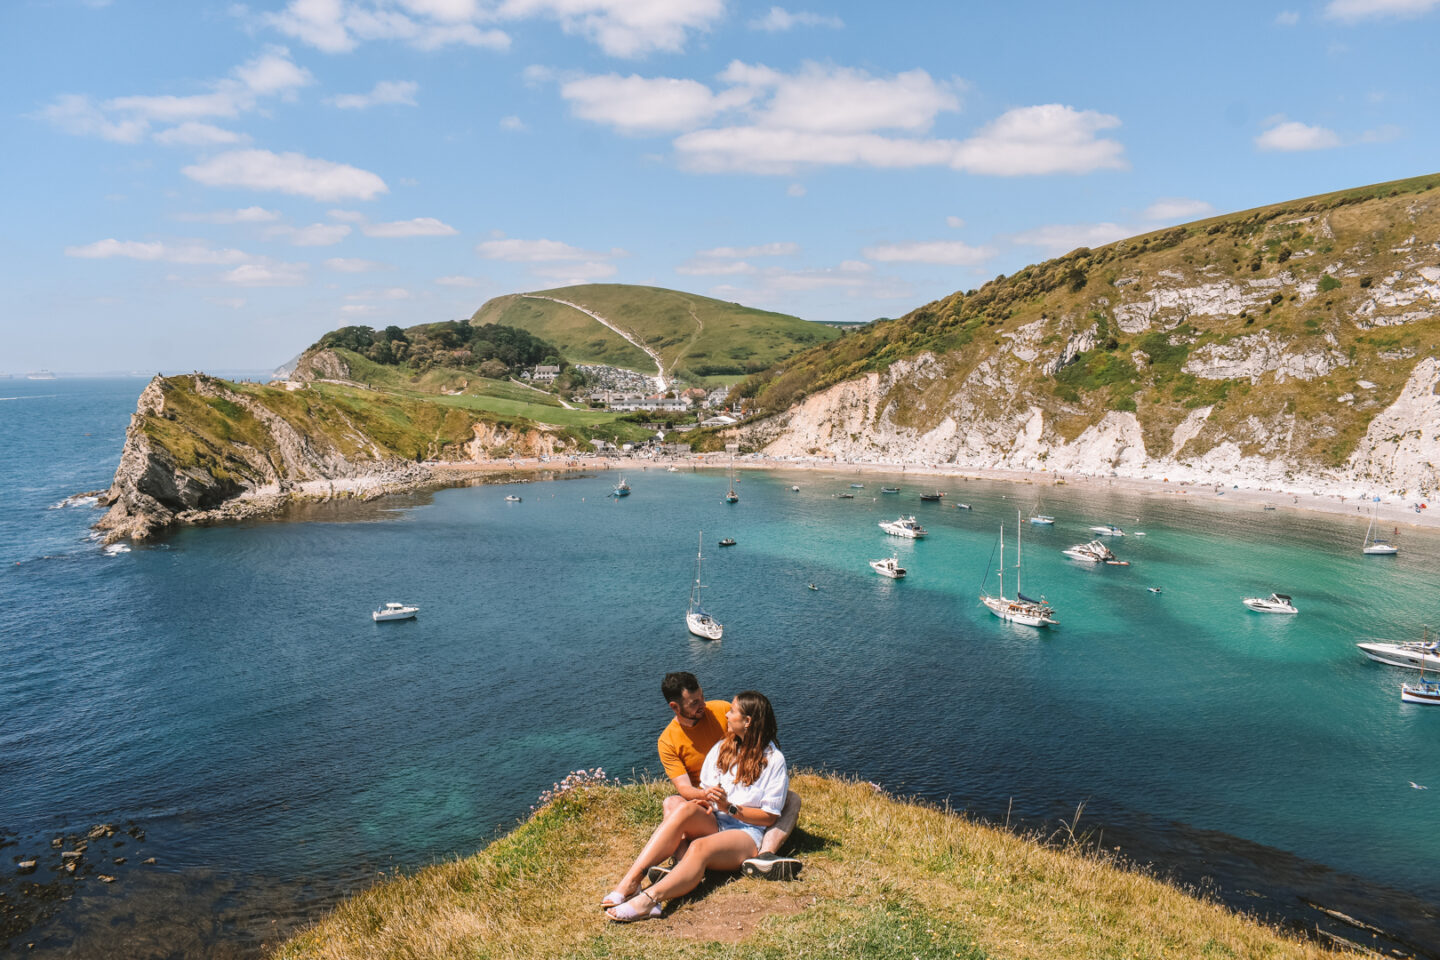 Top places to visit in Dorset - Visit Lulworth Cove